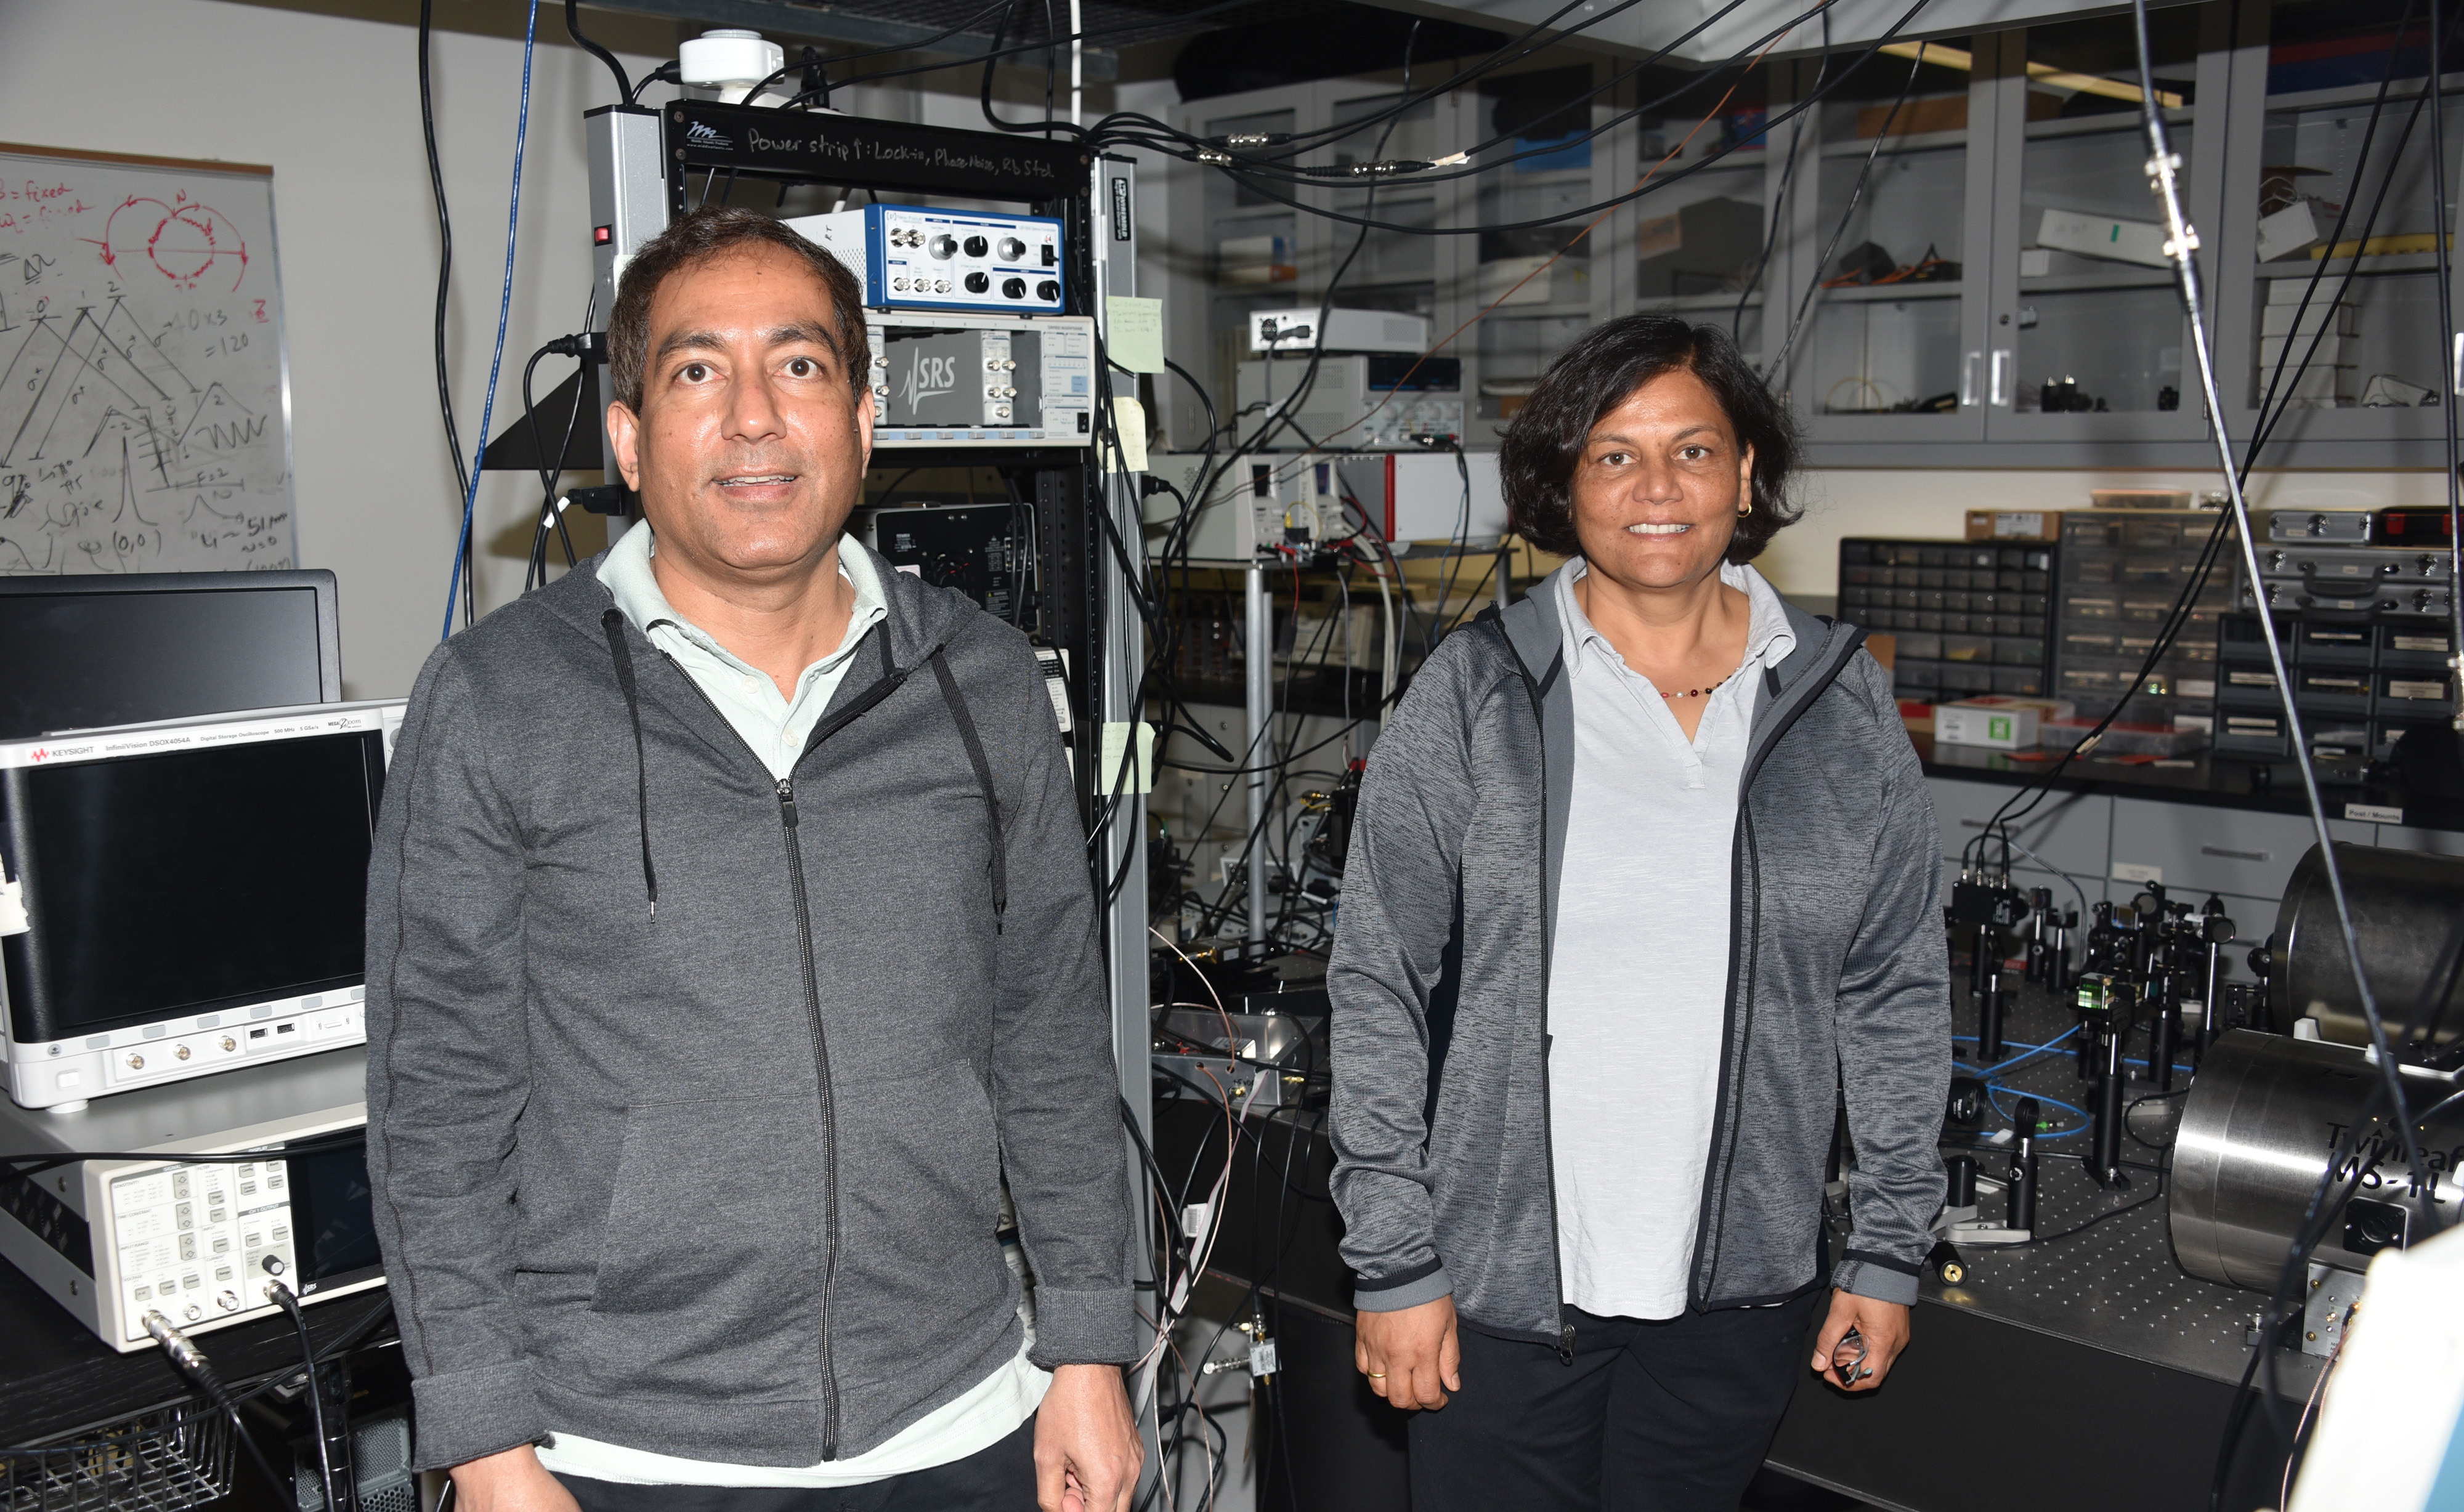 Dr. Gour Pati and Dr. Renu Tripathi, both professors of physics and engineering, are the principal investigator and co-PI, respectively, of a $239,908 U.S. Department of Defense grant to develop a millimeter wave quantum sensing system.